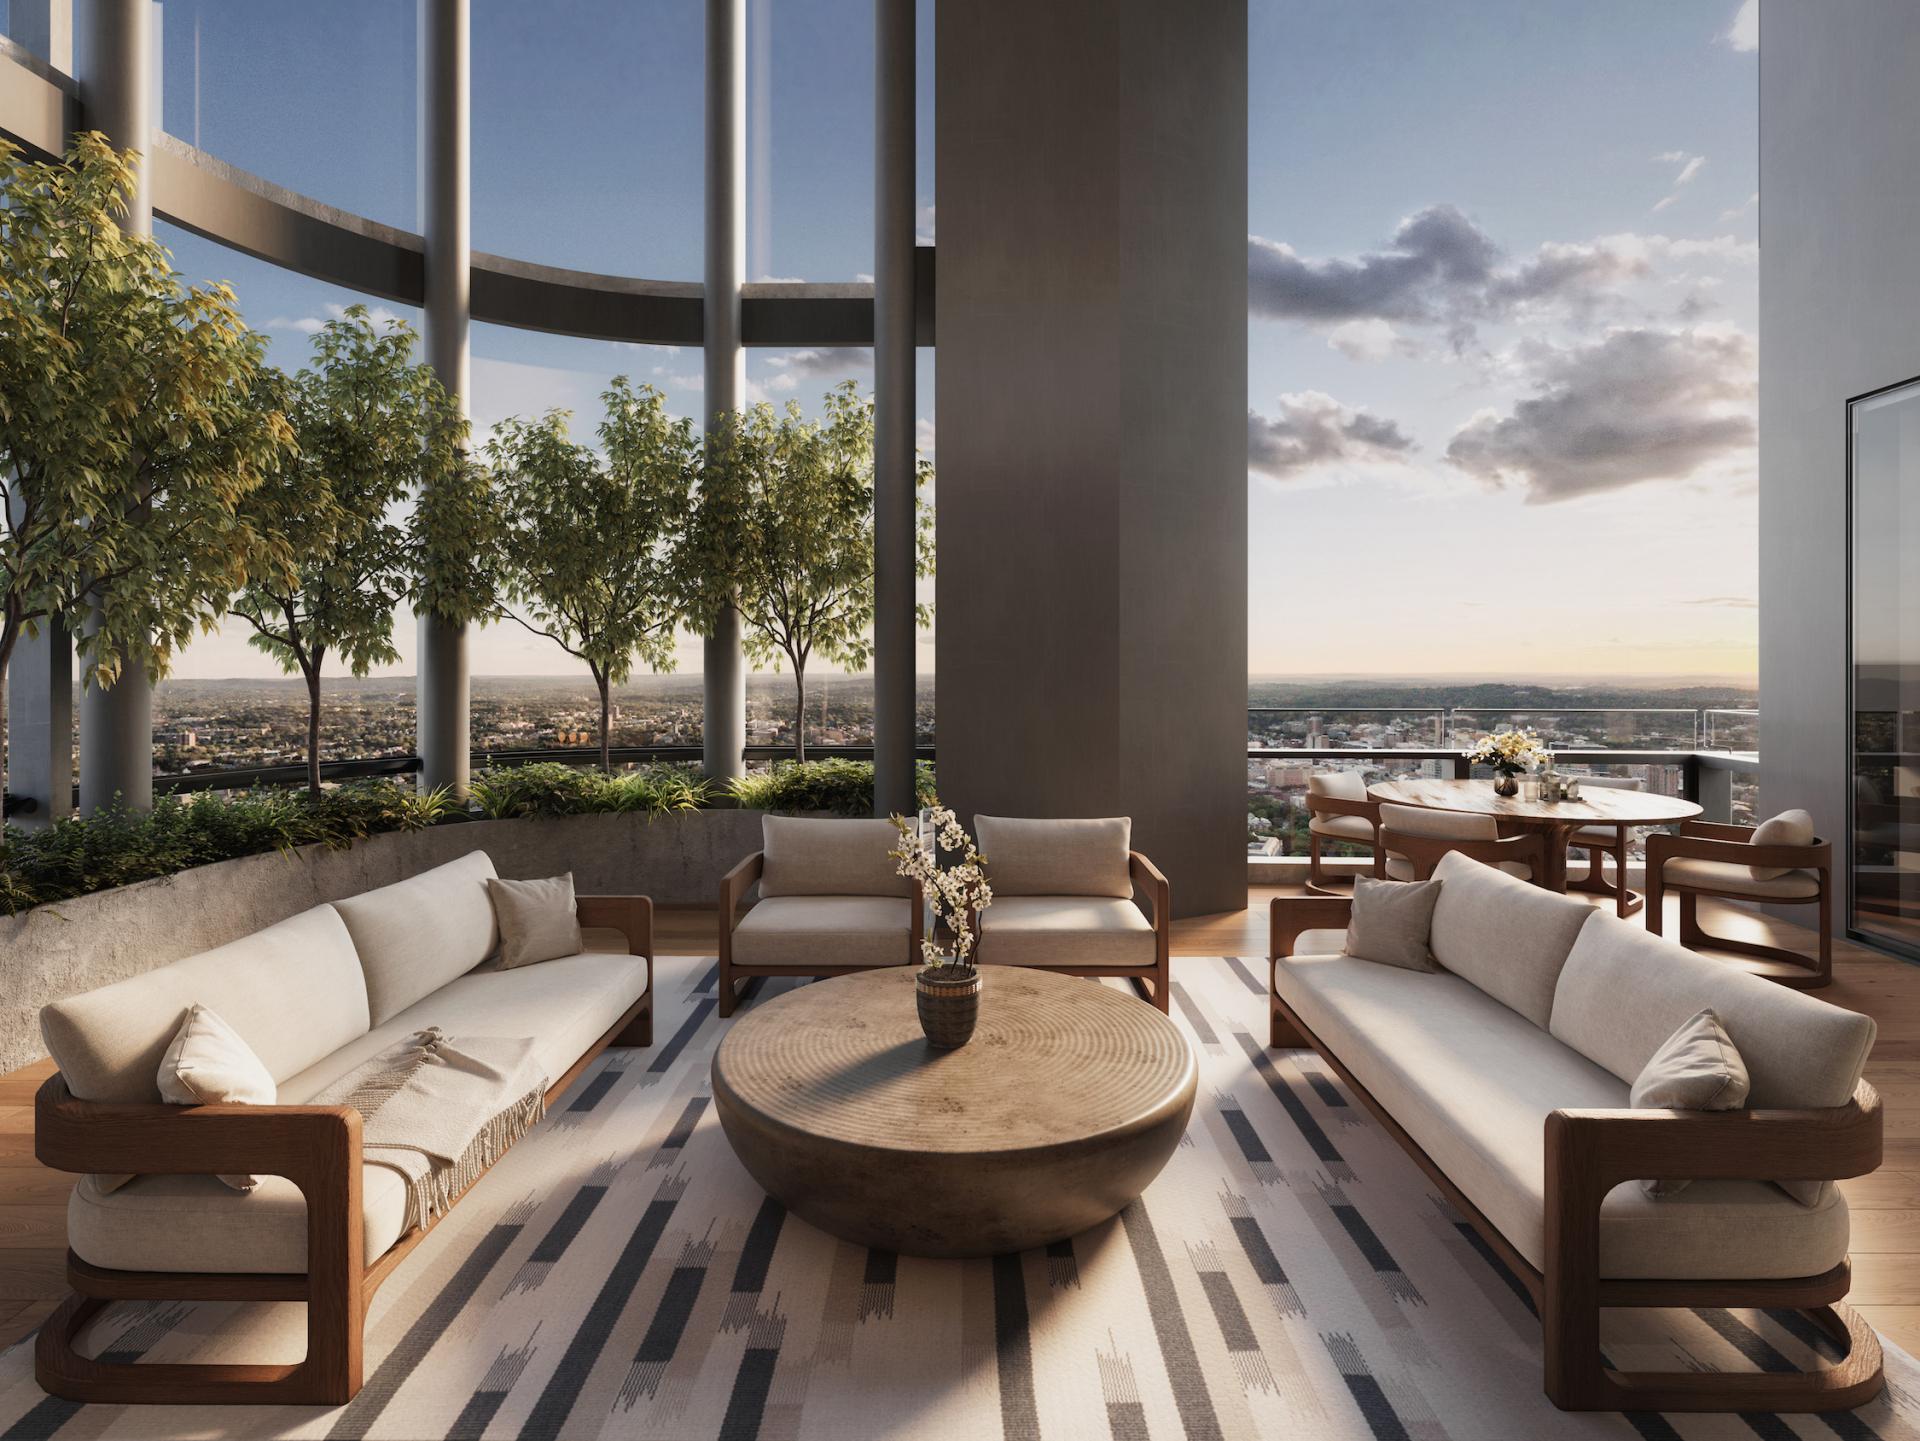 Boston's Tallest Residential Tower Offers Duplex Penthouse for Sale at $35 Million